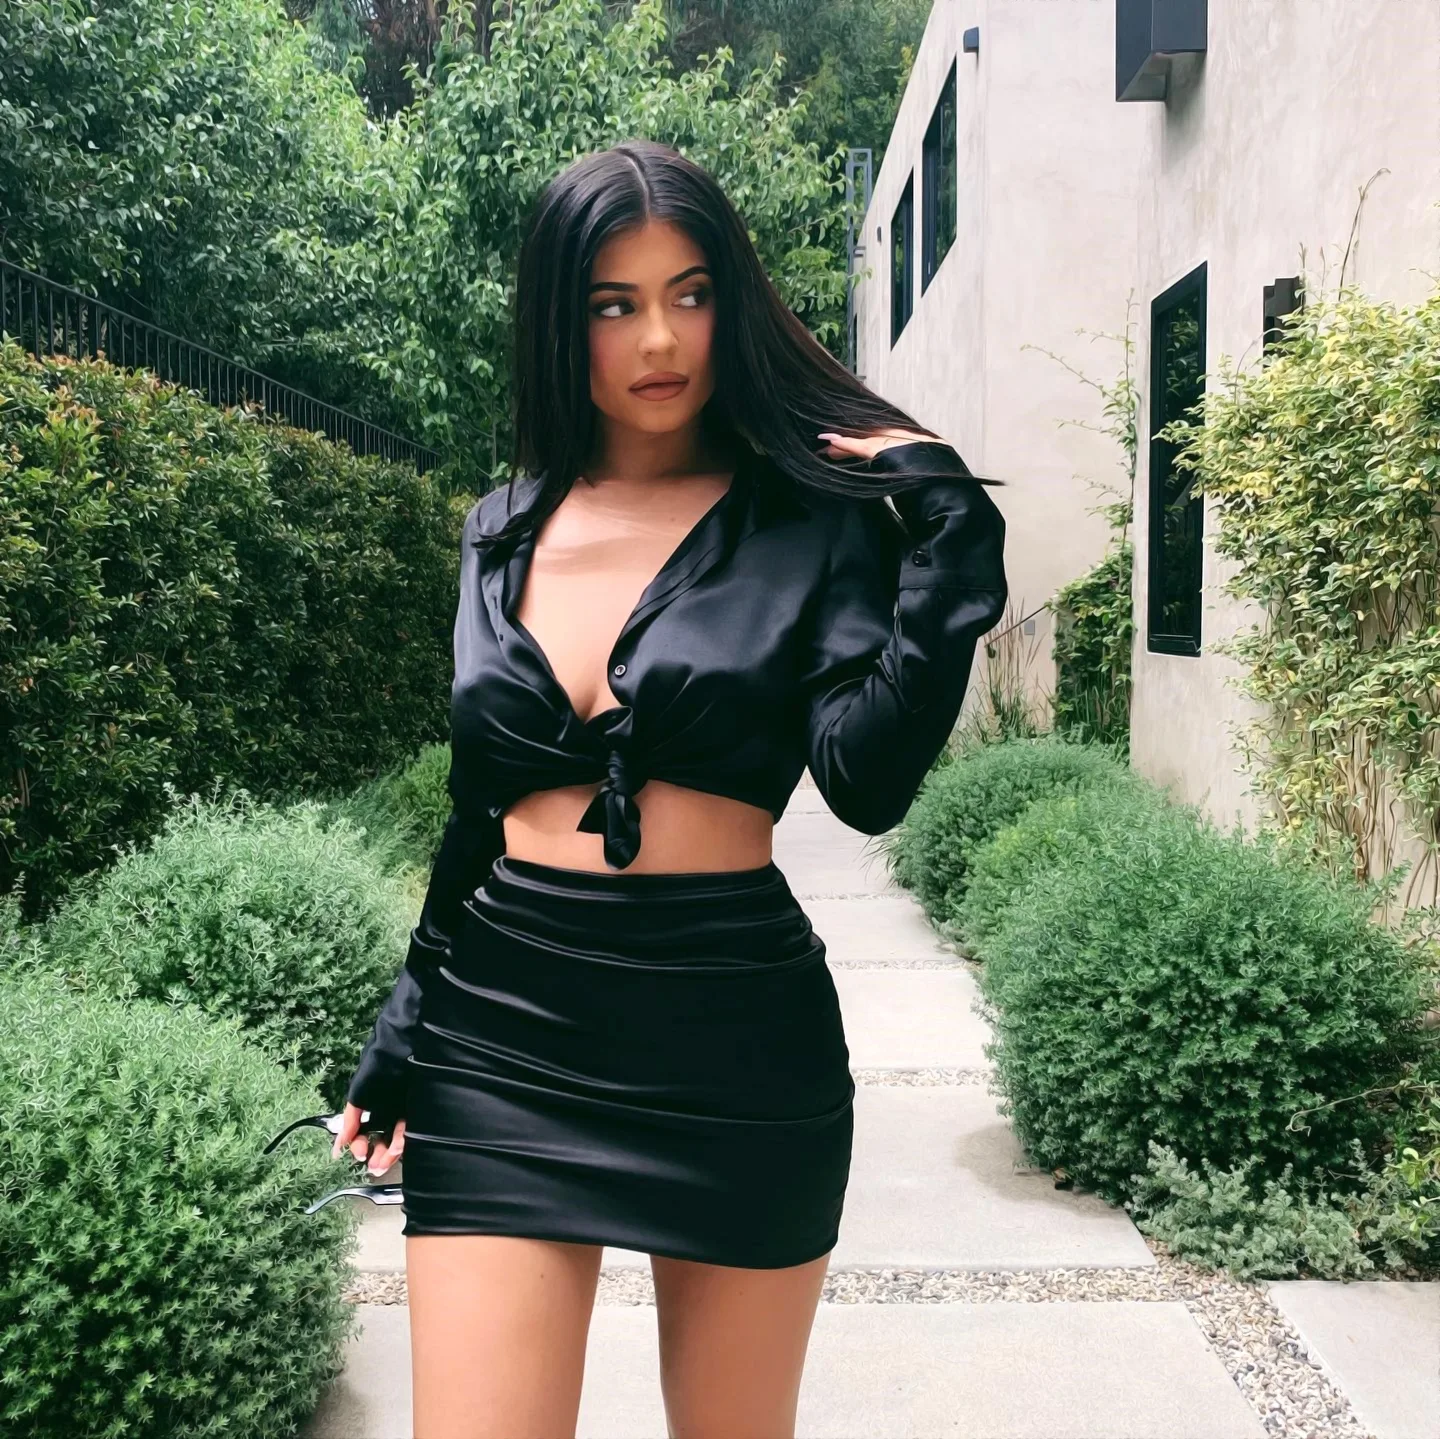 Kylie Jenner In black dress looking super sexy